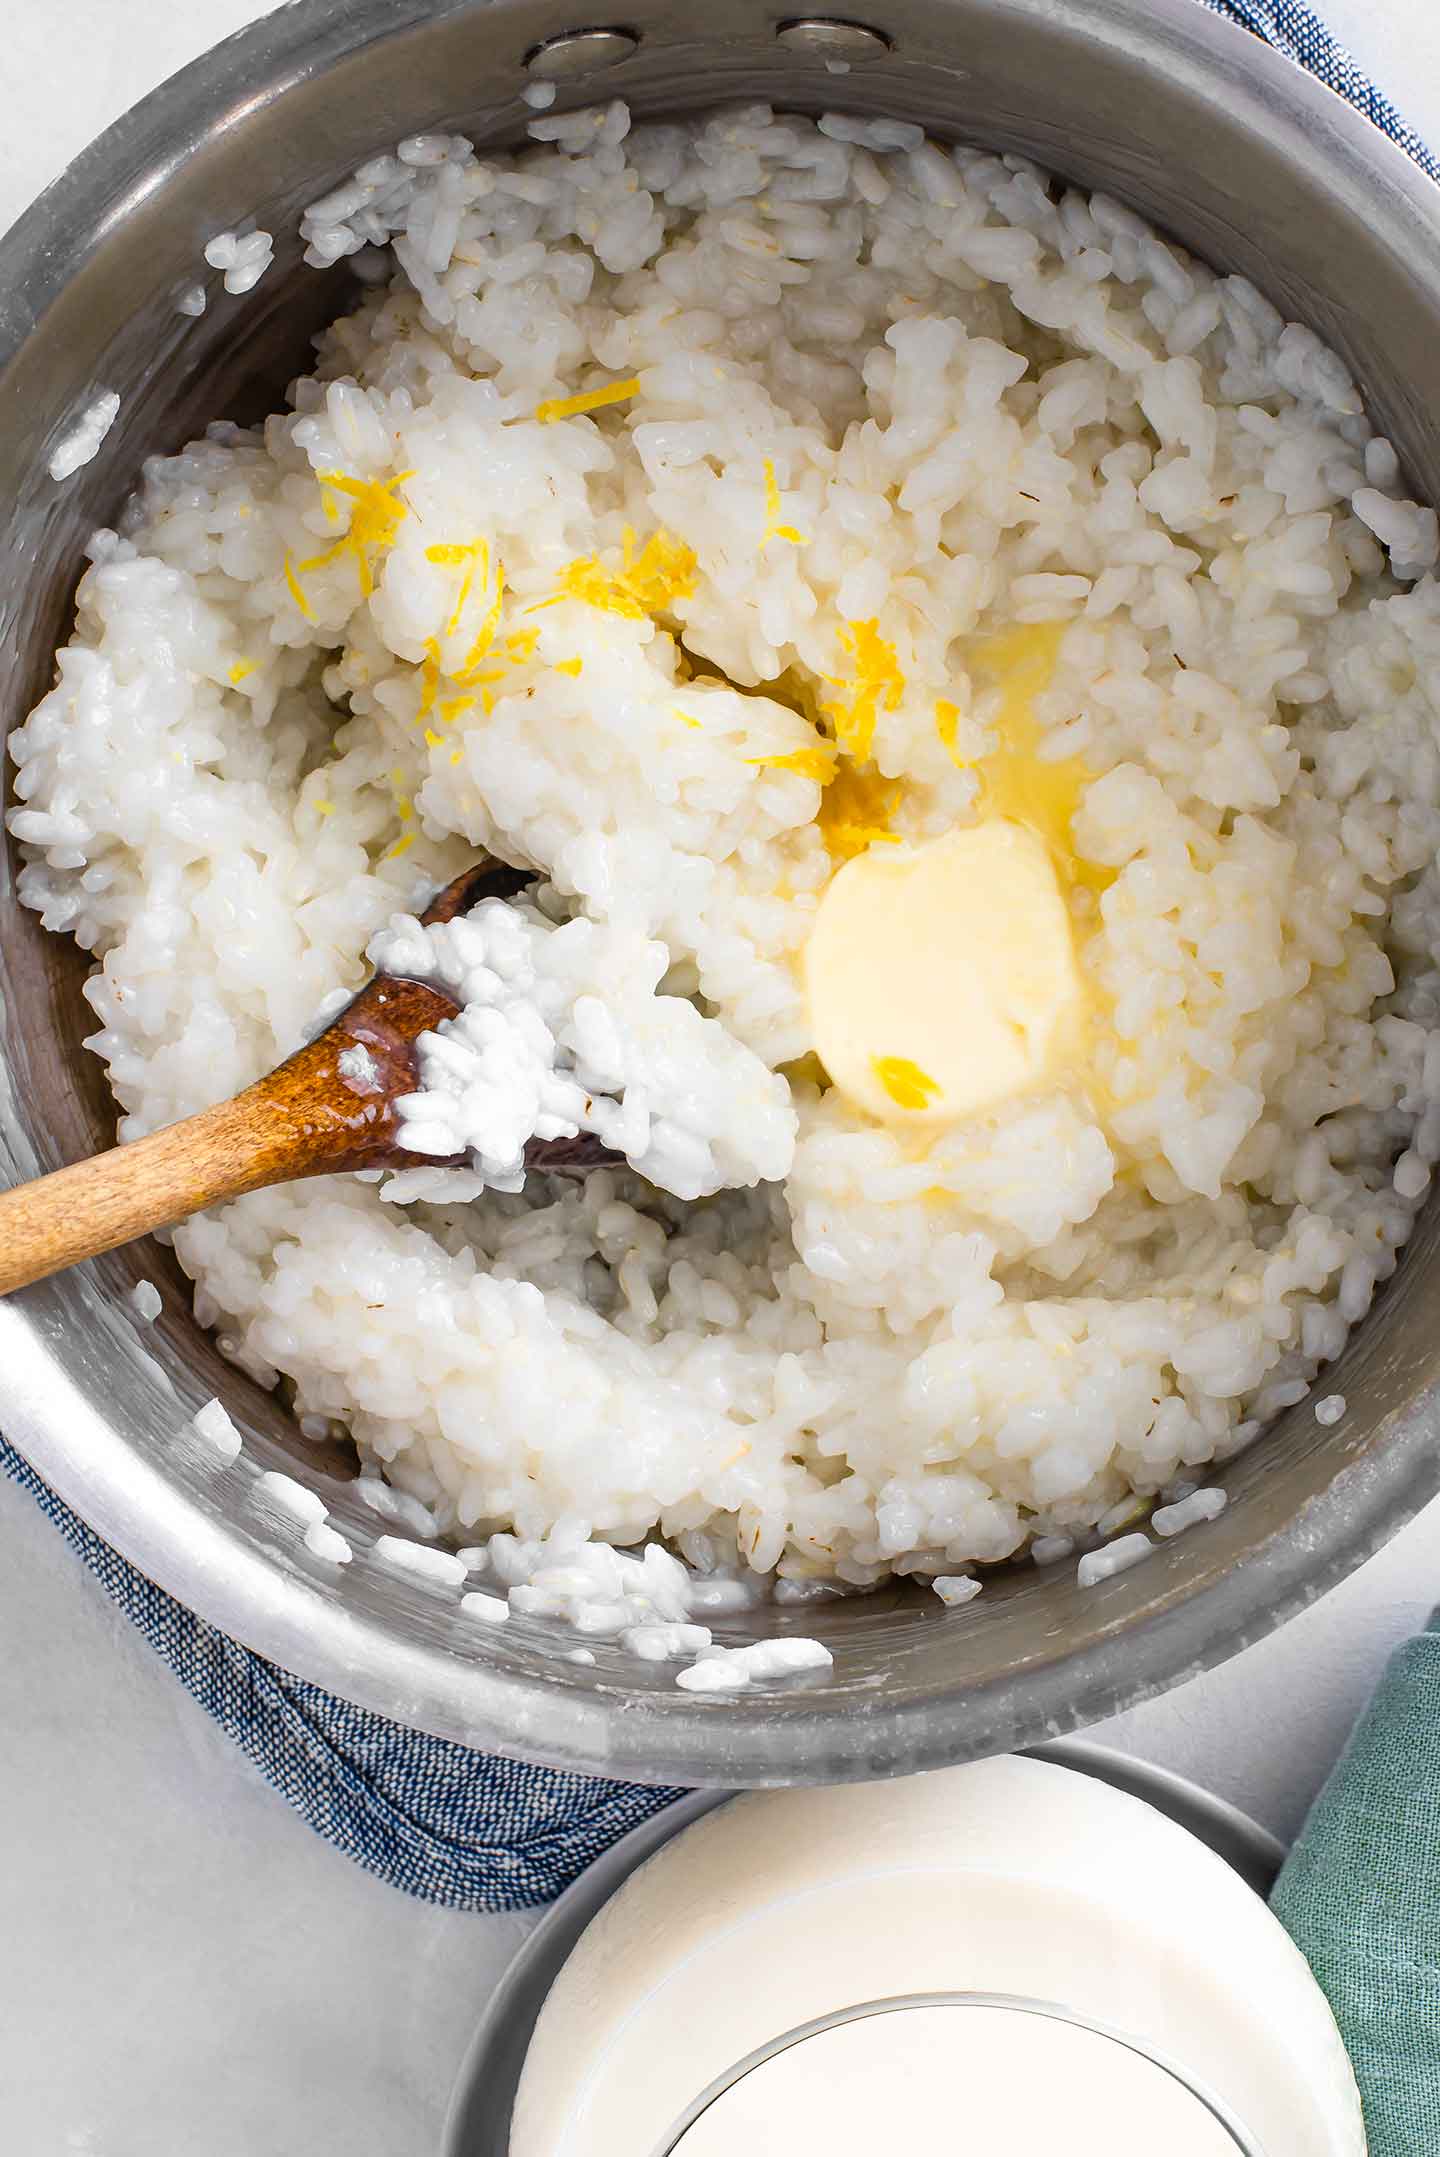 Top down view of butter melting into white rice. Lemon zest sits on the top of the rice and a wooden spoon rests in the pot.